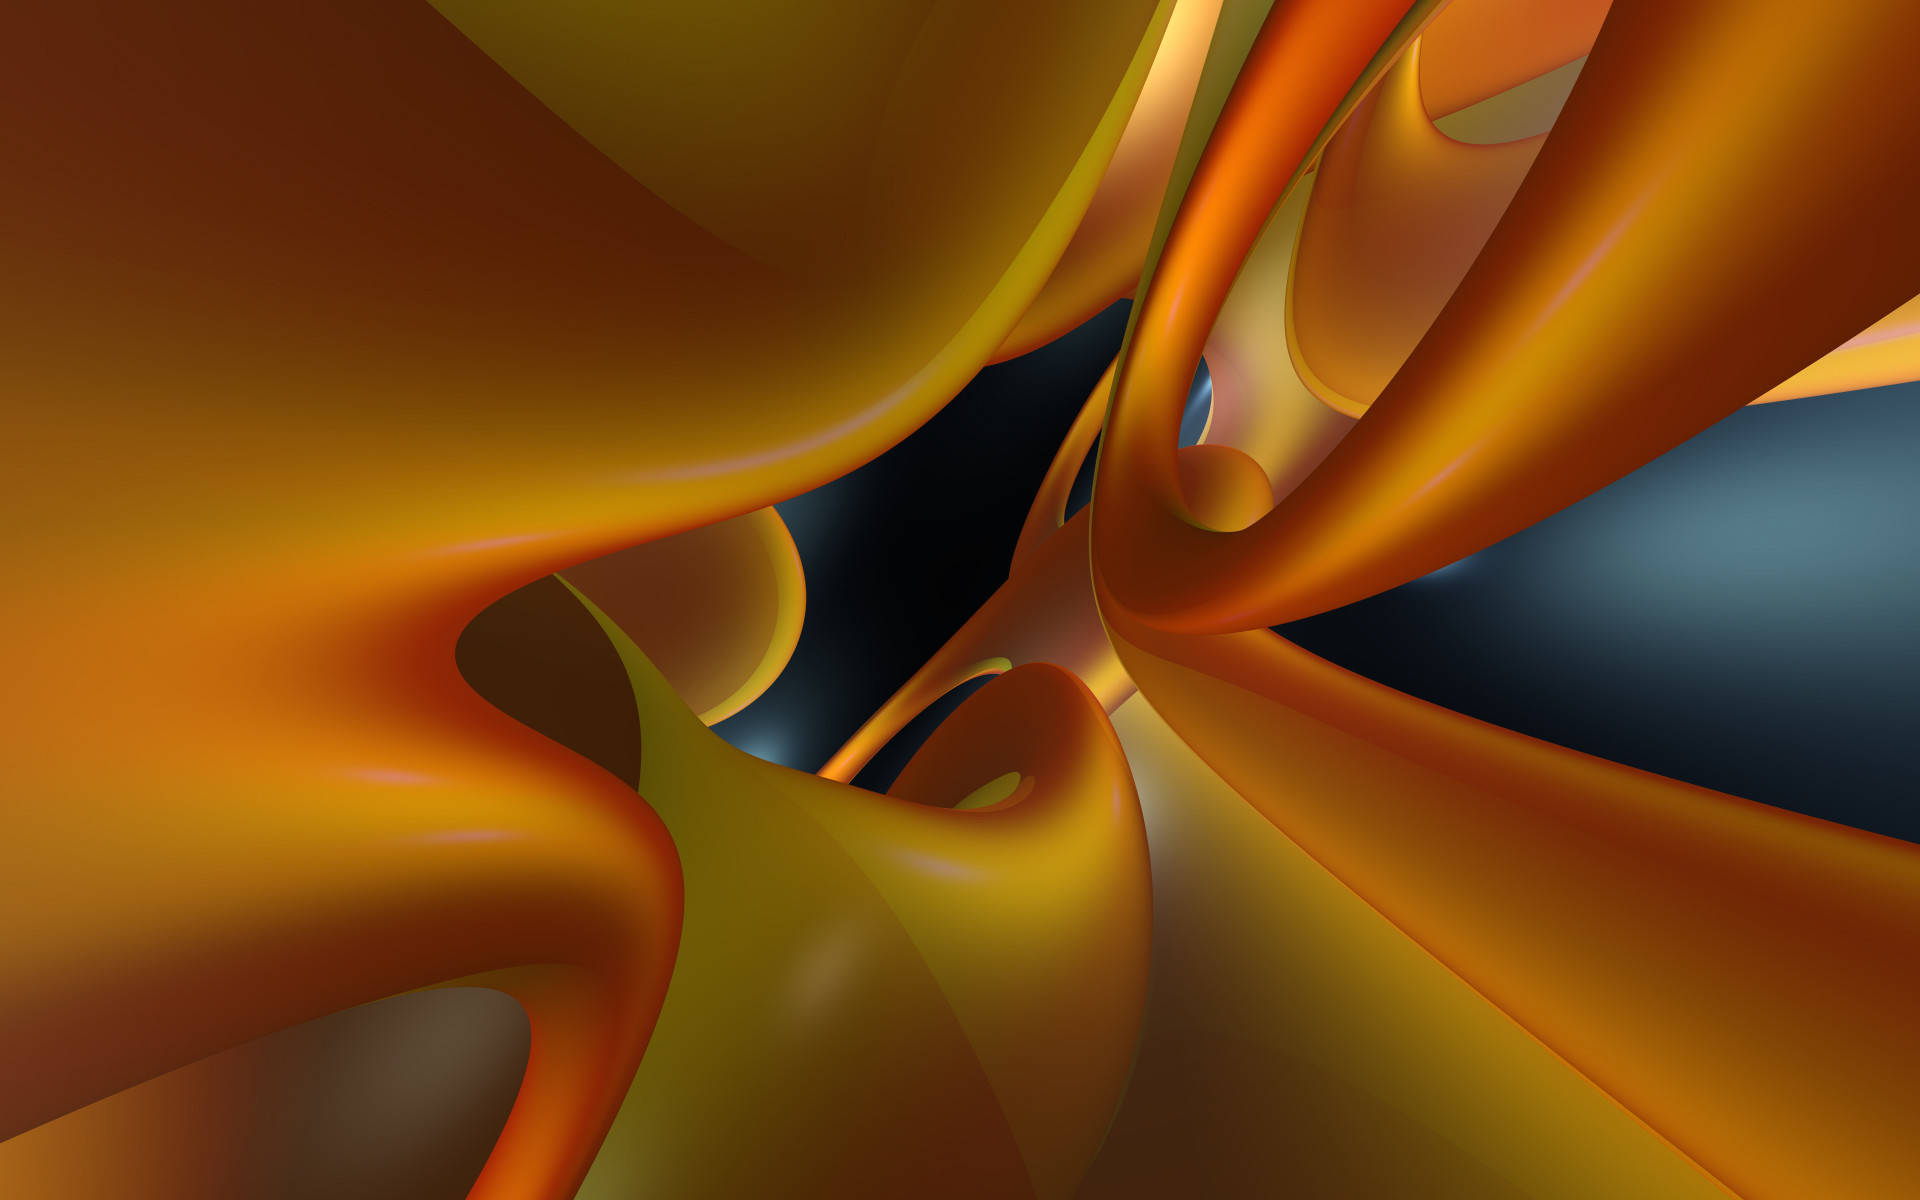 Abstract Hd Design Orange And Yellow